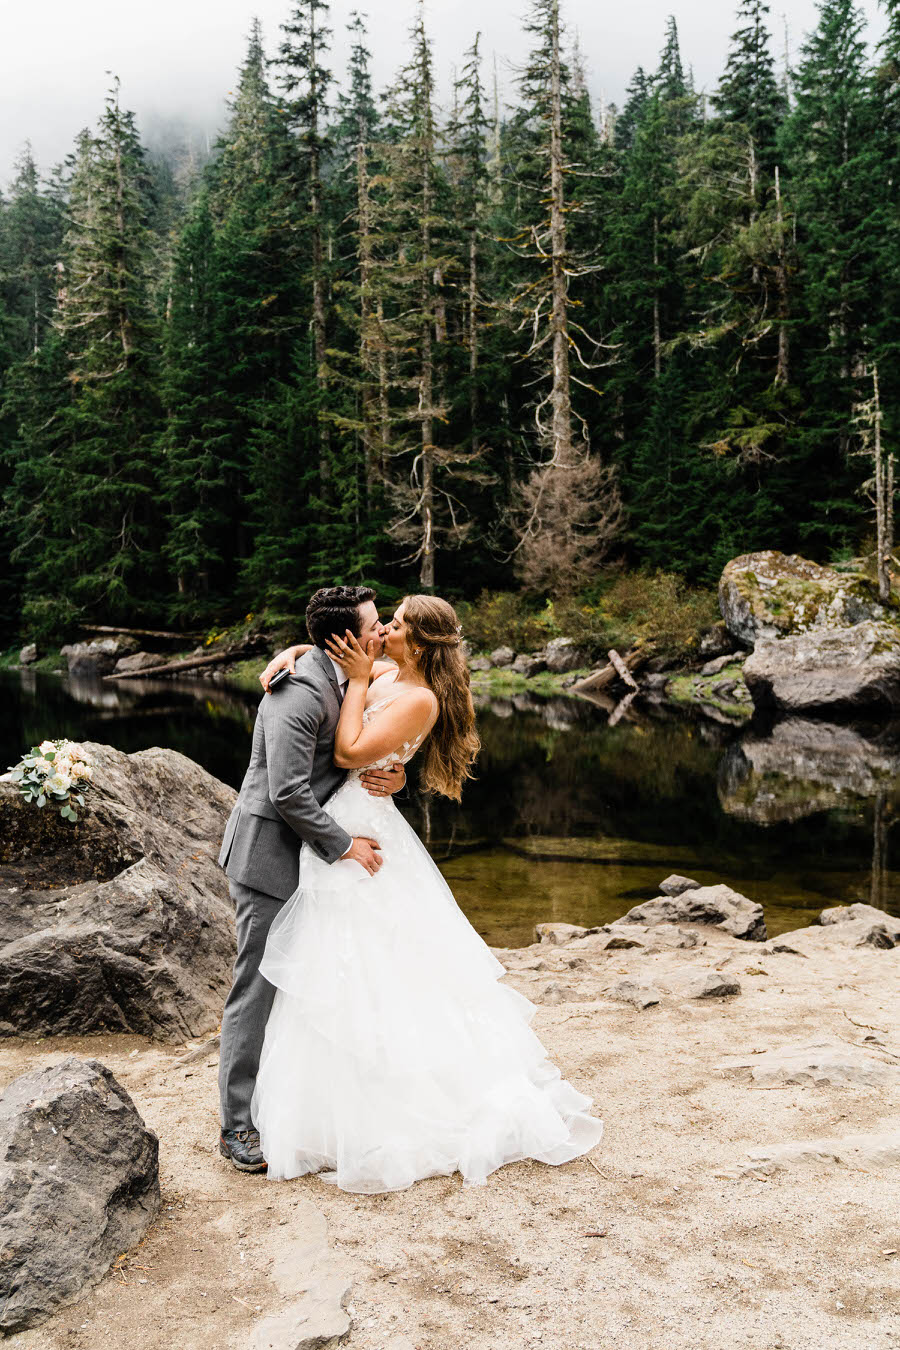 A bride and groom share a romantic kiss next to an alpine lake in the Washington backcountry